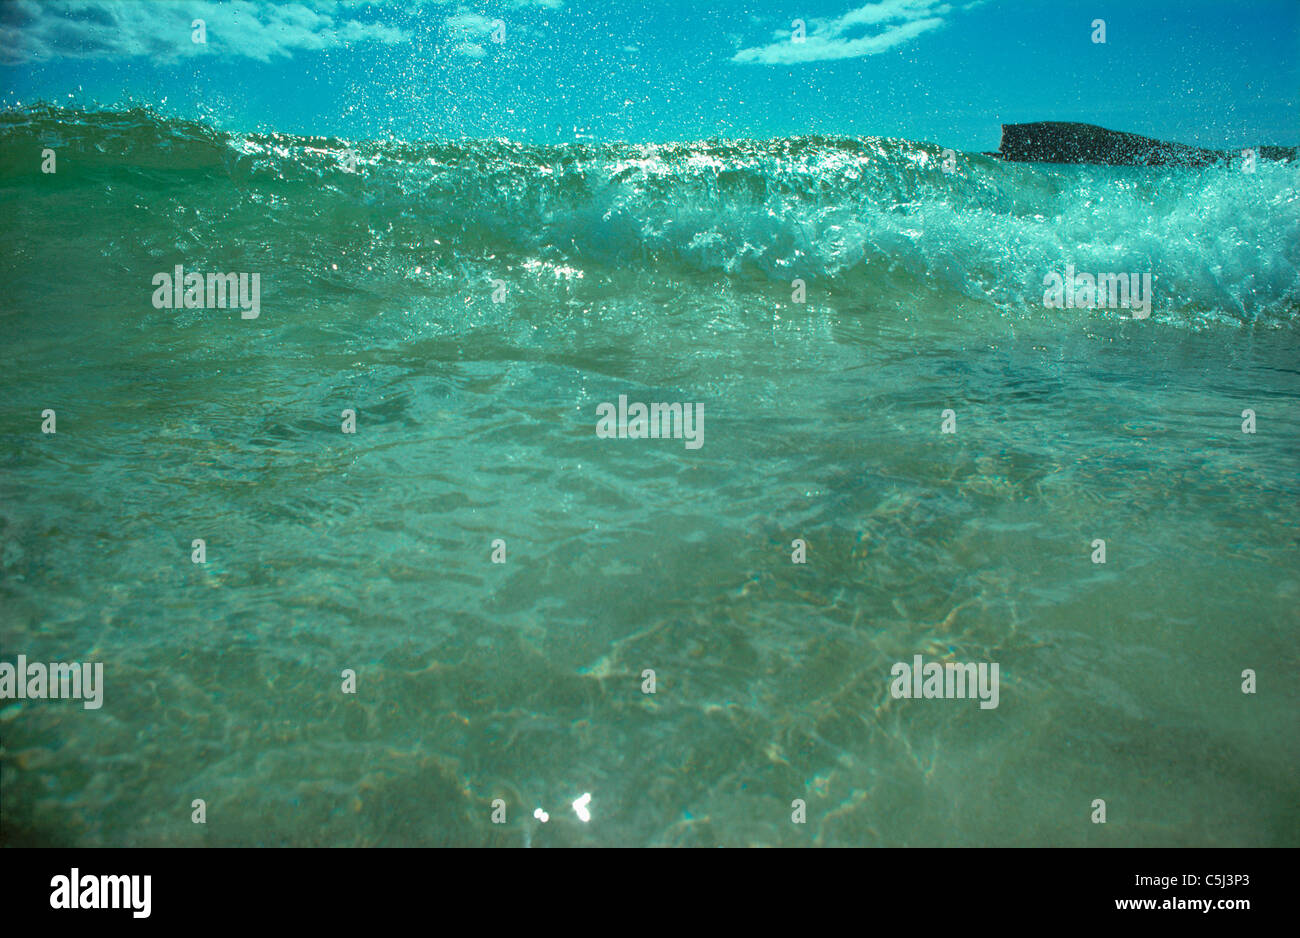 Semi-abstract image of a single green wave breaking towards the camera with a solitary distant headland just visible above the Stock Photo